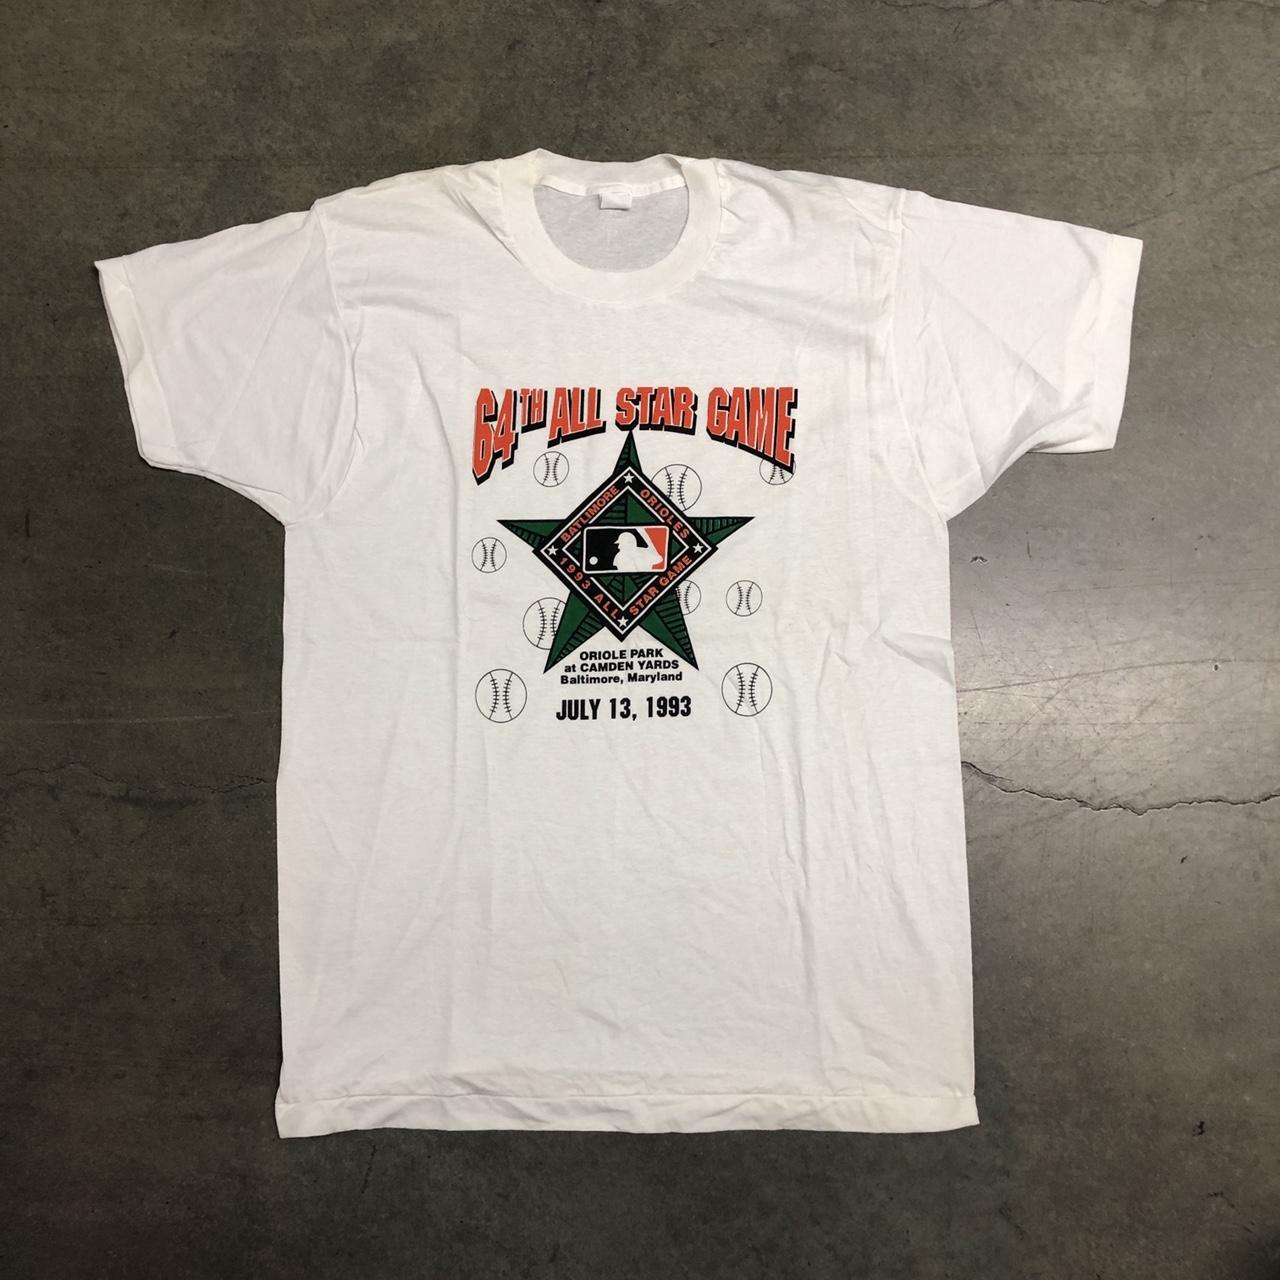 Vintage Baltimore Orioles 1993 All Star Game T-Shirt